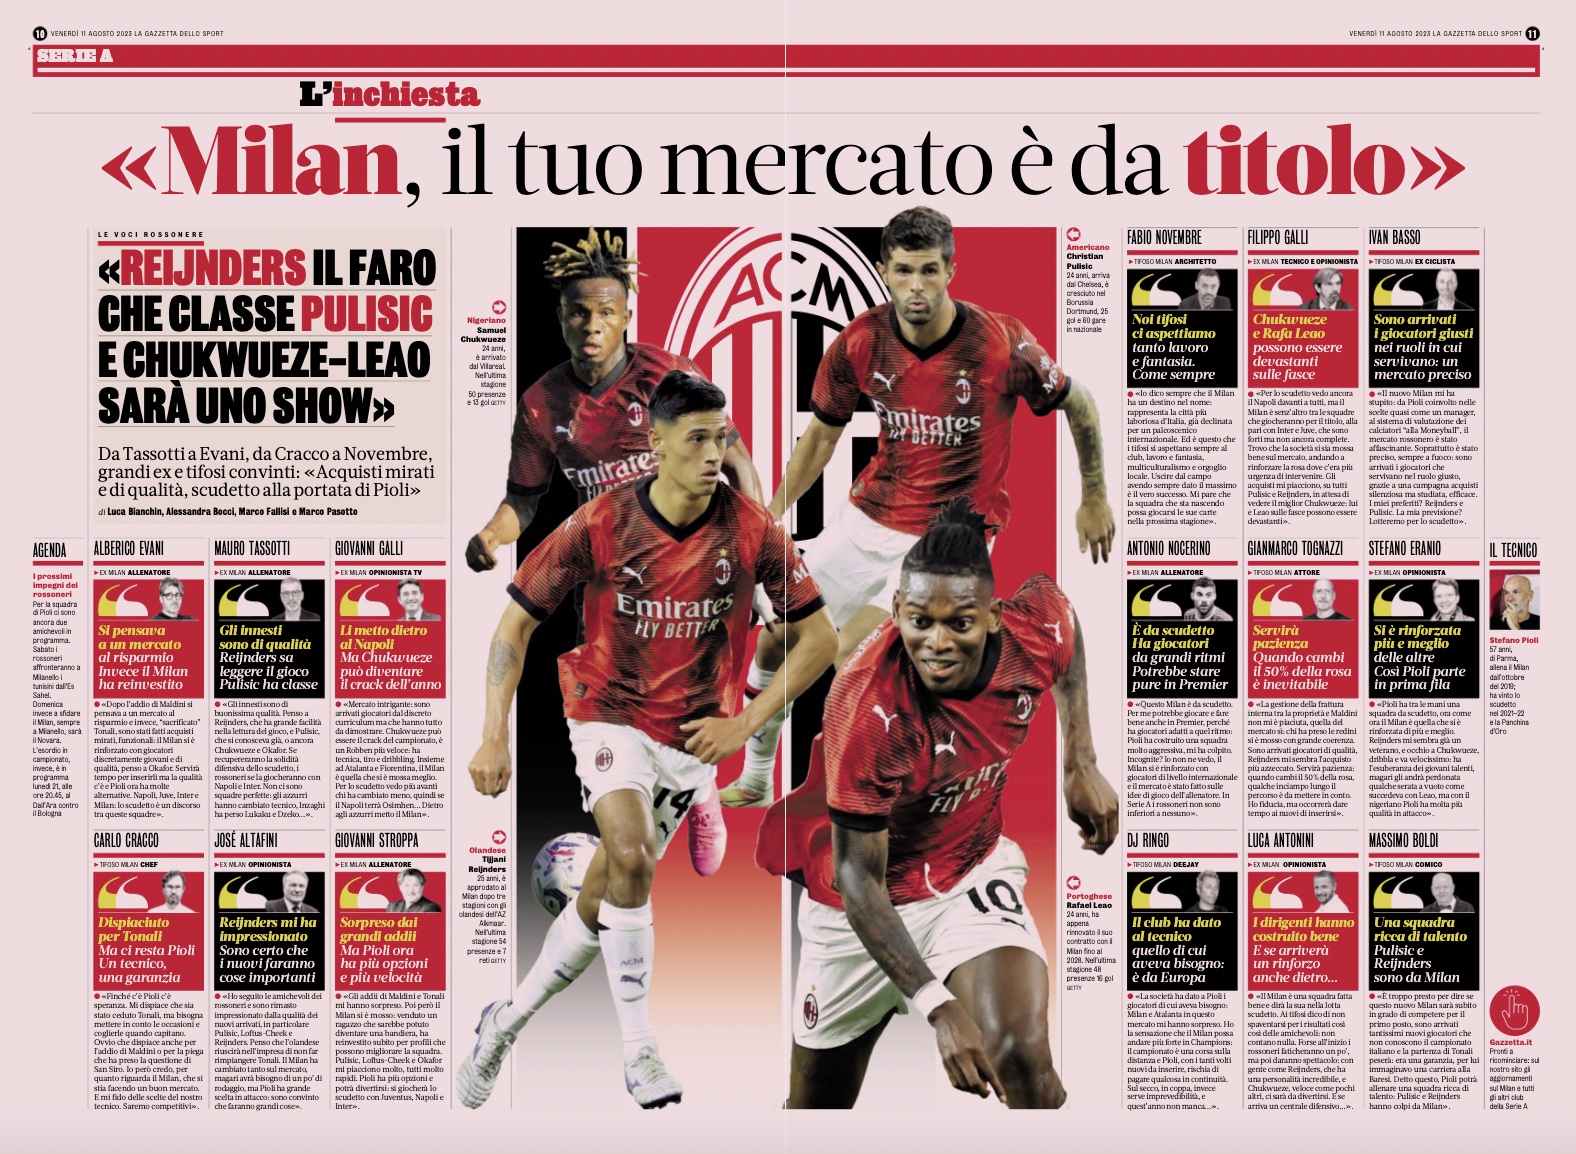 Nocerino, Antonini and other ex-players agree: This Milan is worthy of the  Scudetto